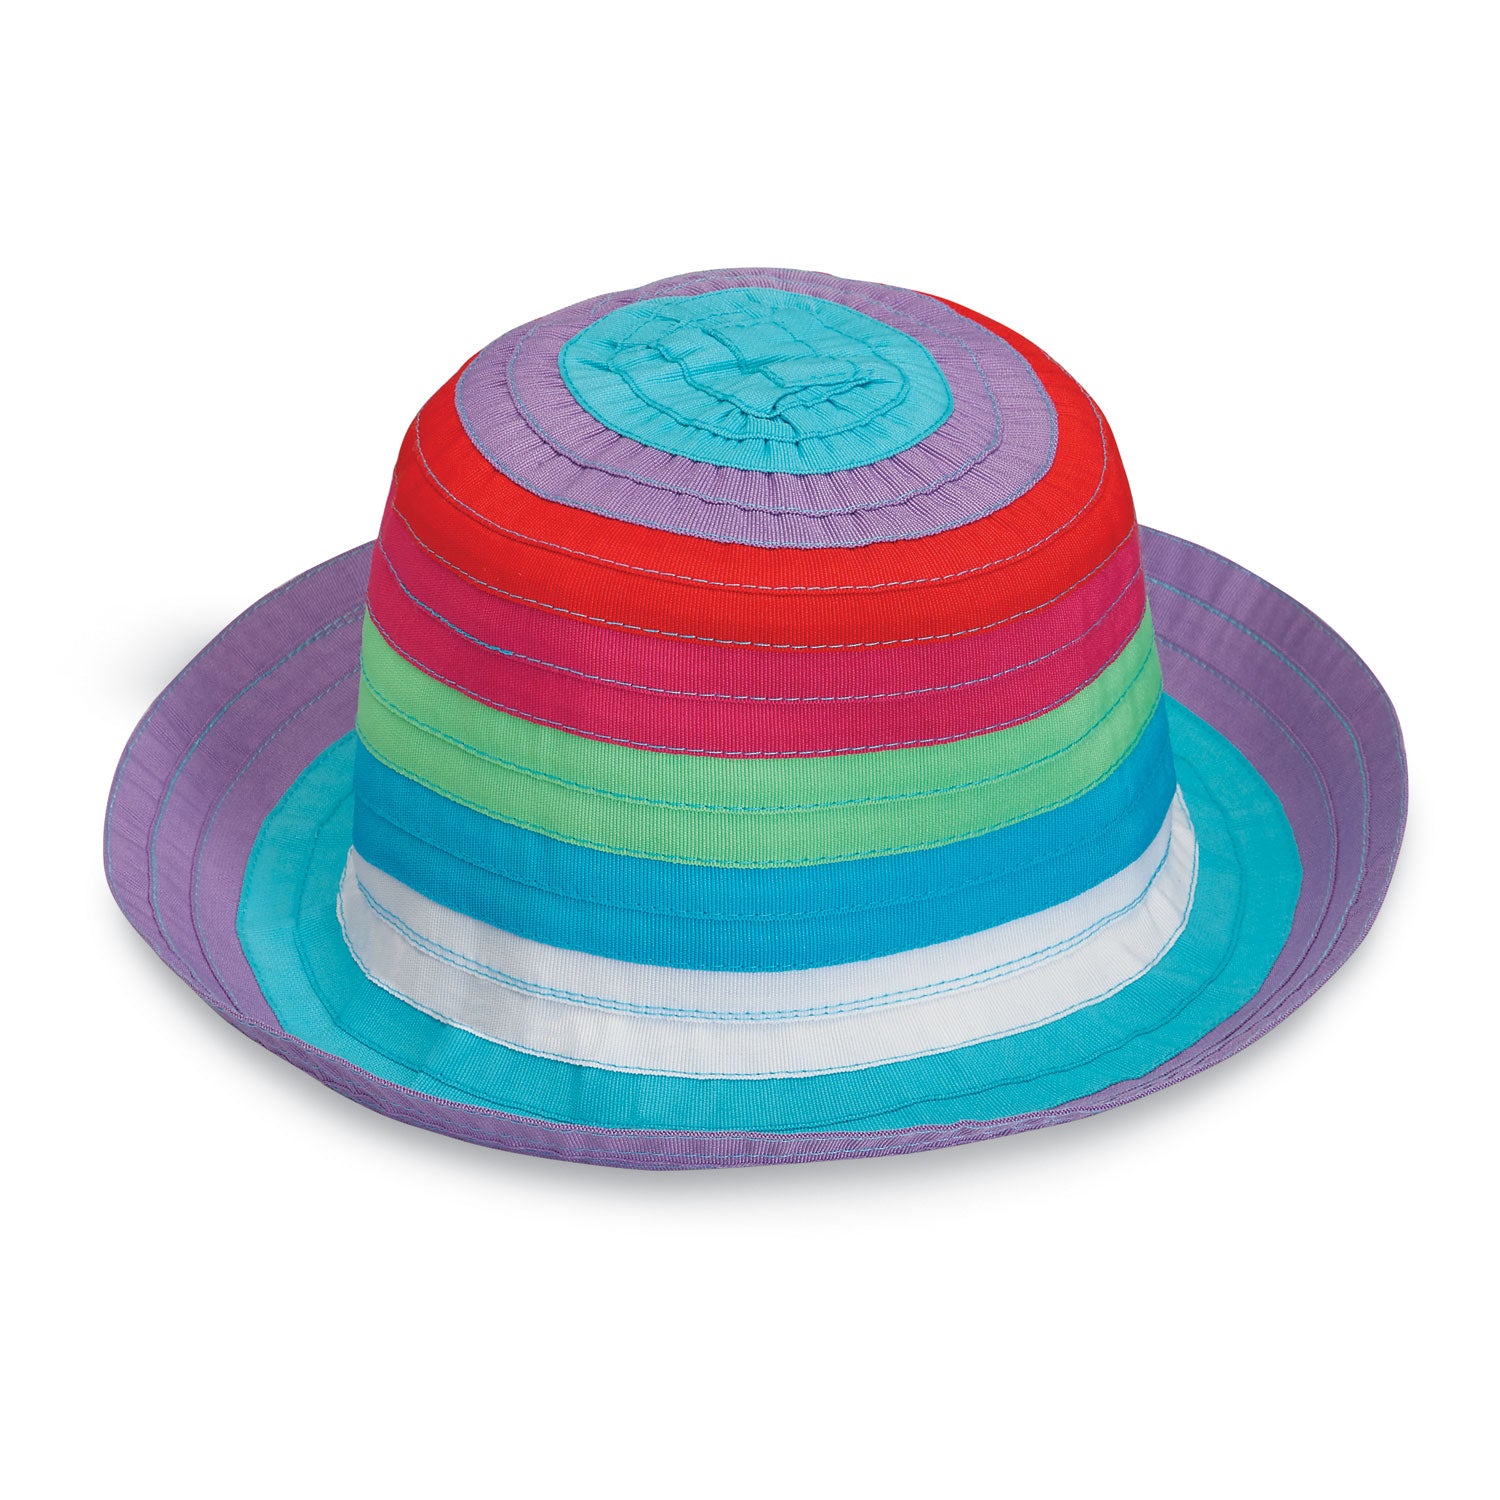 Featuring Kid's bucket style sun hat, made with packable, UPF 50 material. 